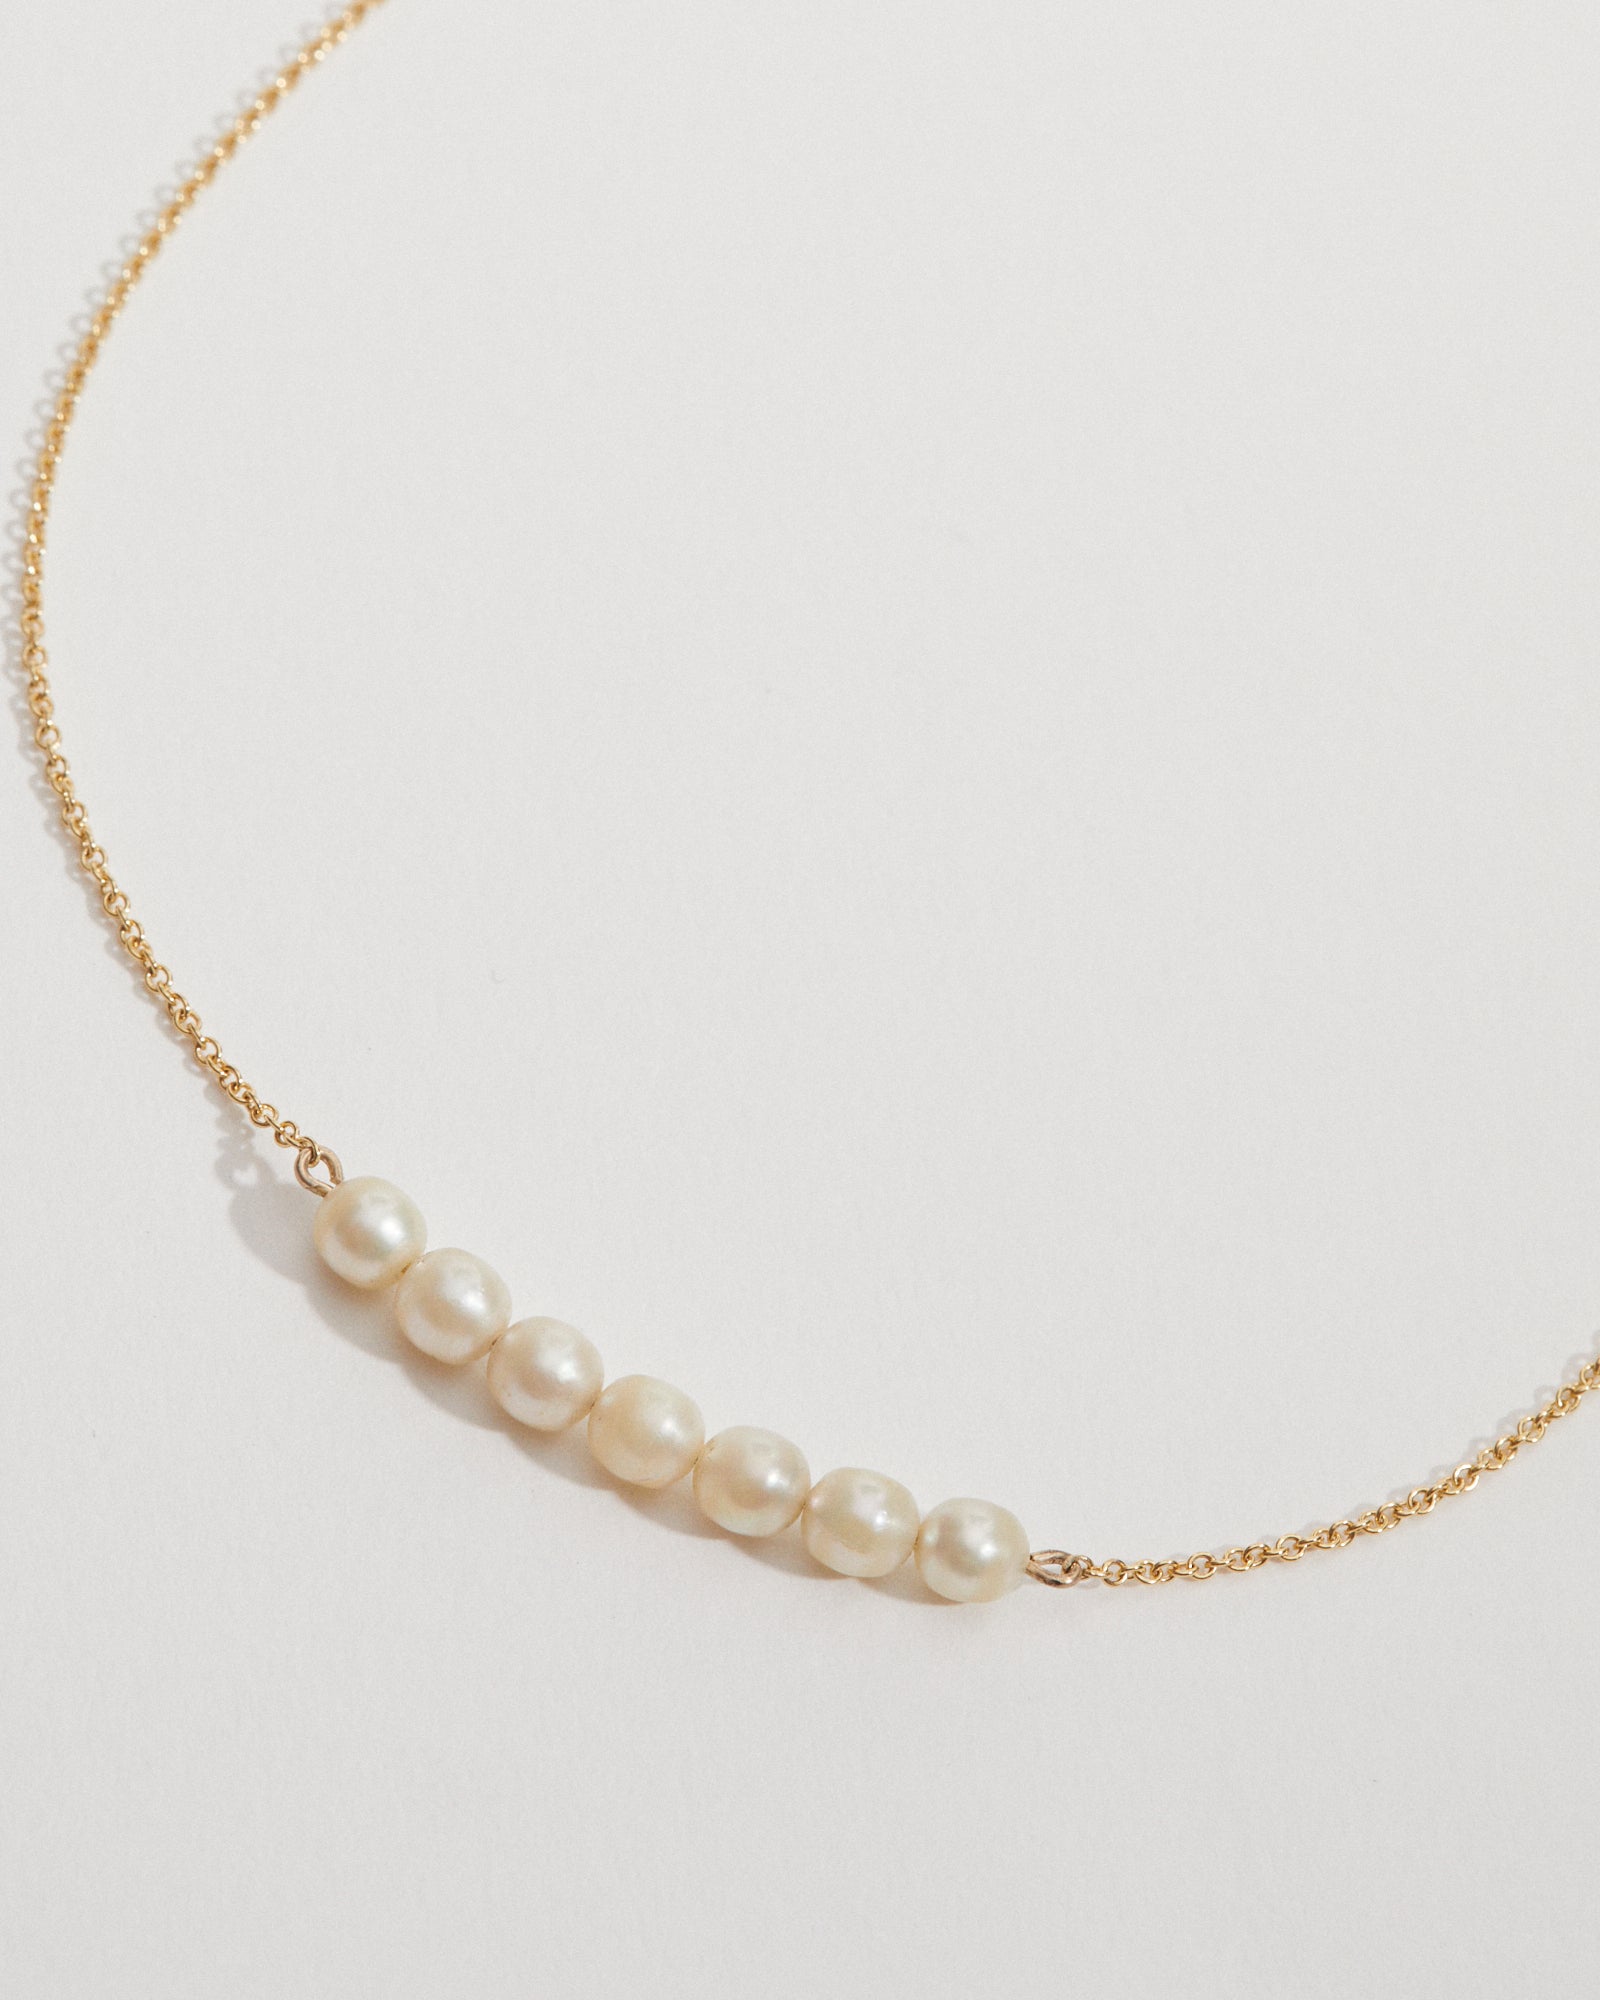 Pearl bar necklace.